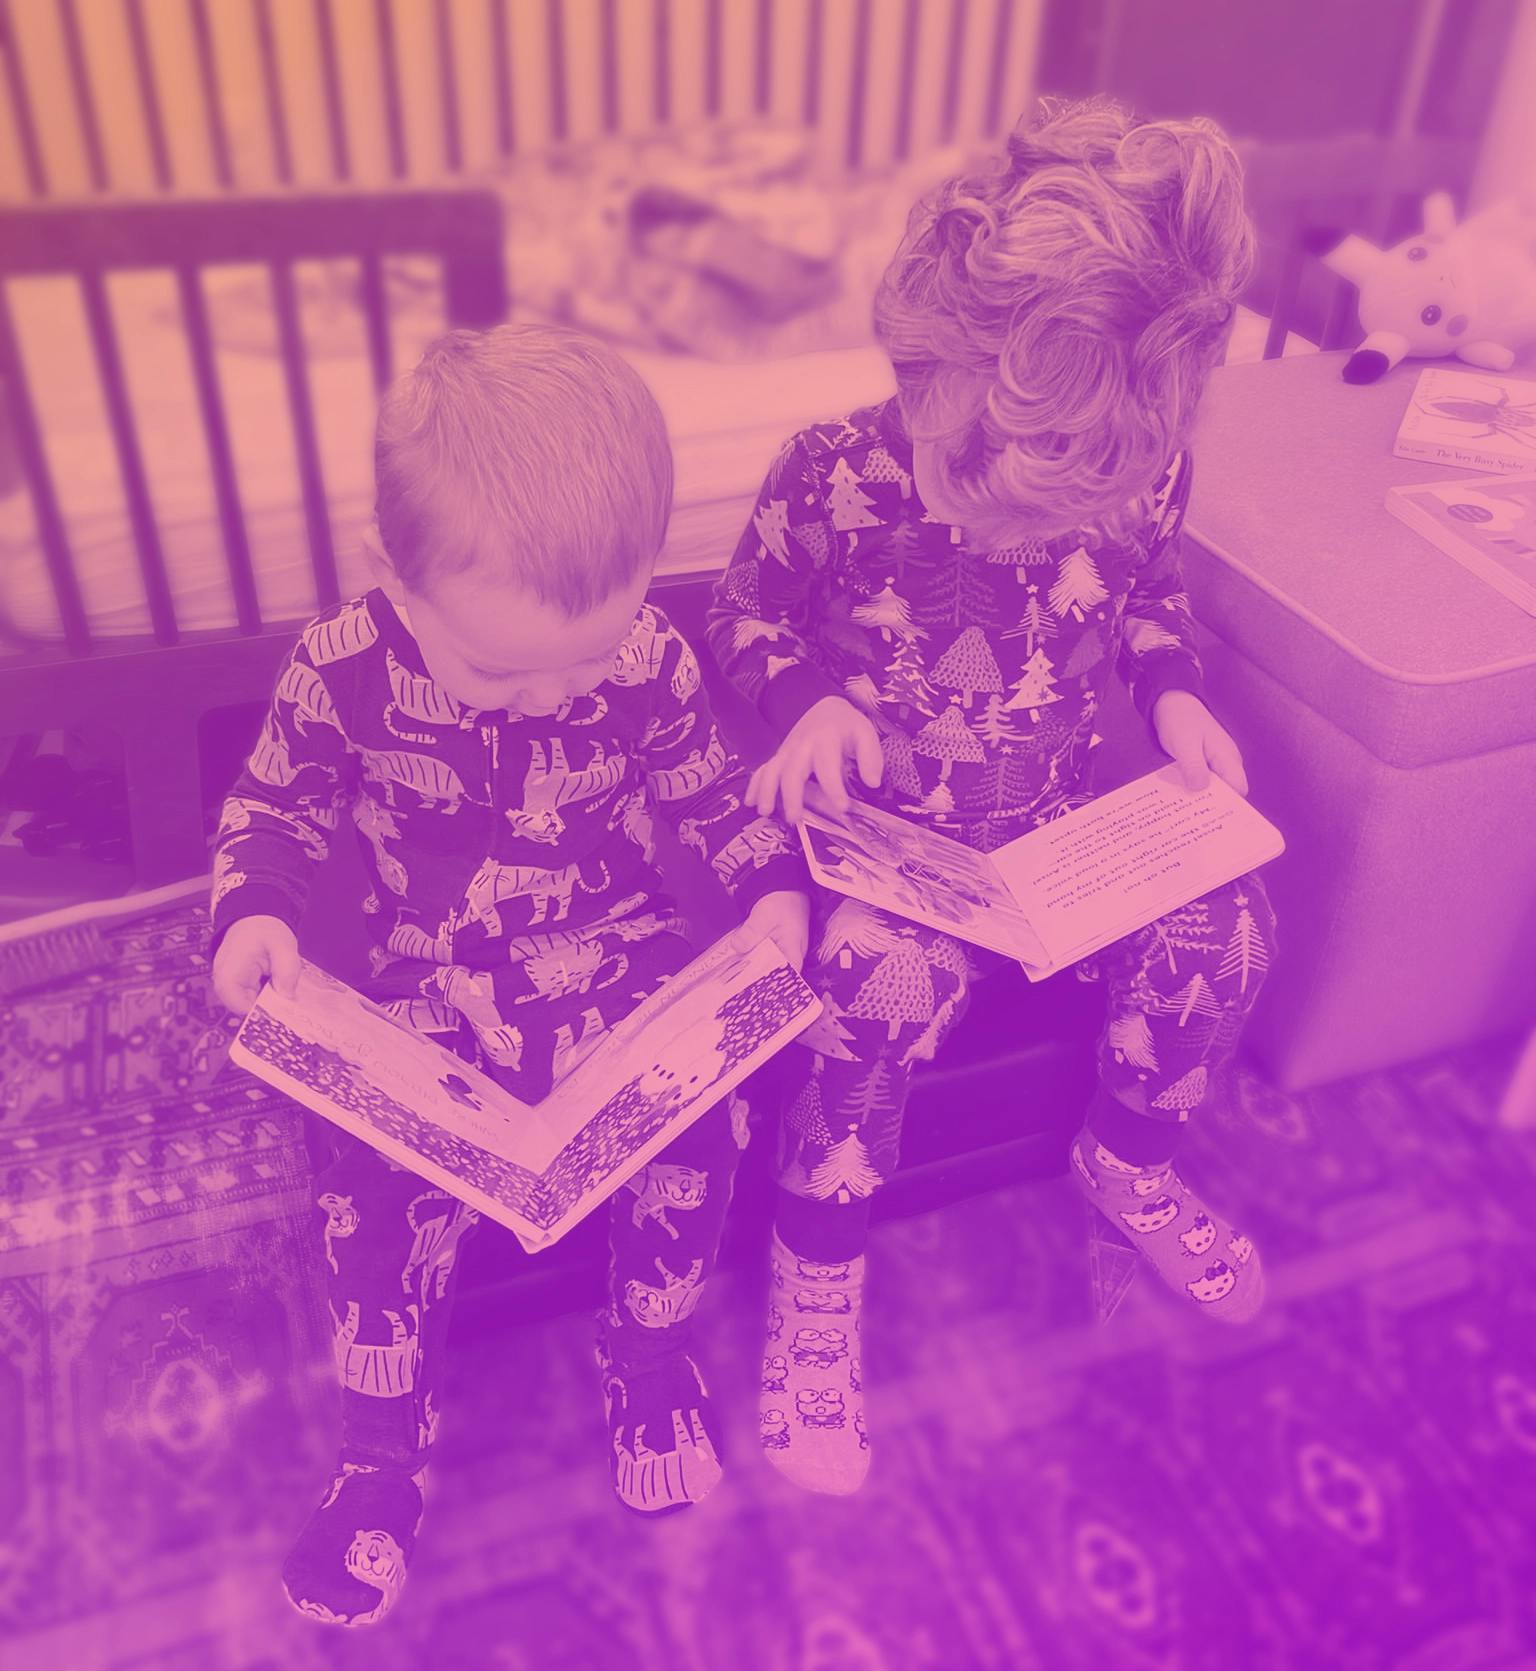 two young kids reading